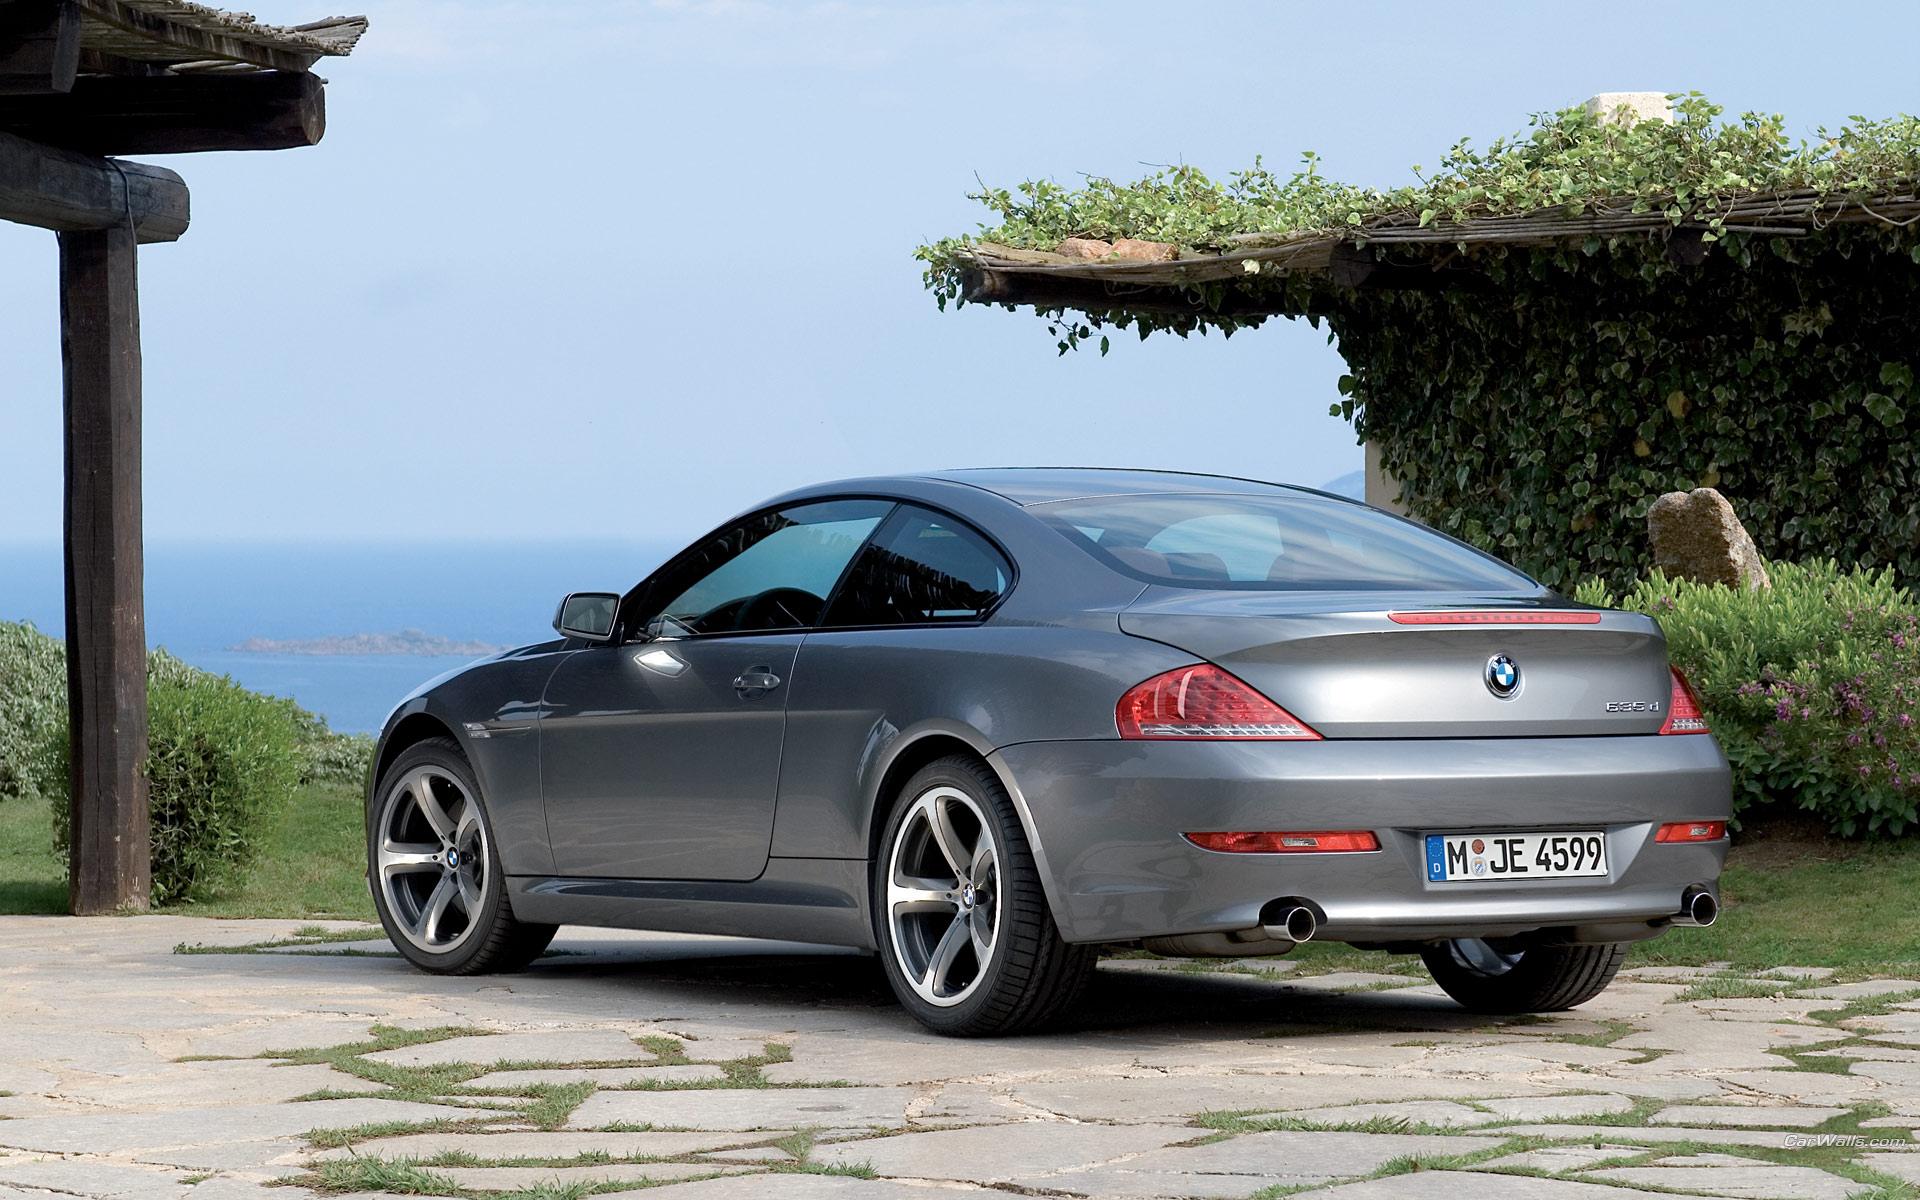 Download full size 6 series coupe Bmw wallpaper / 1920x1200